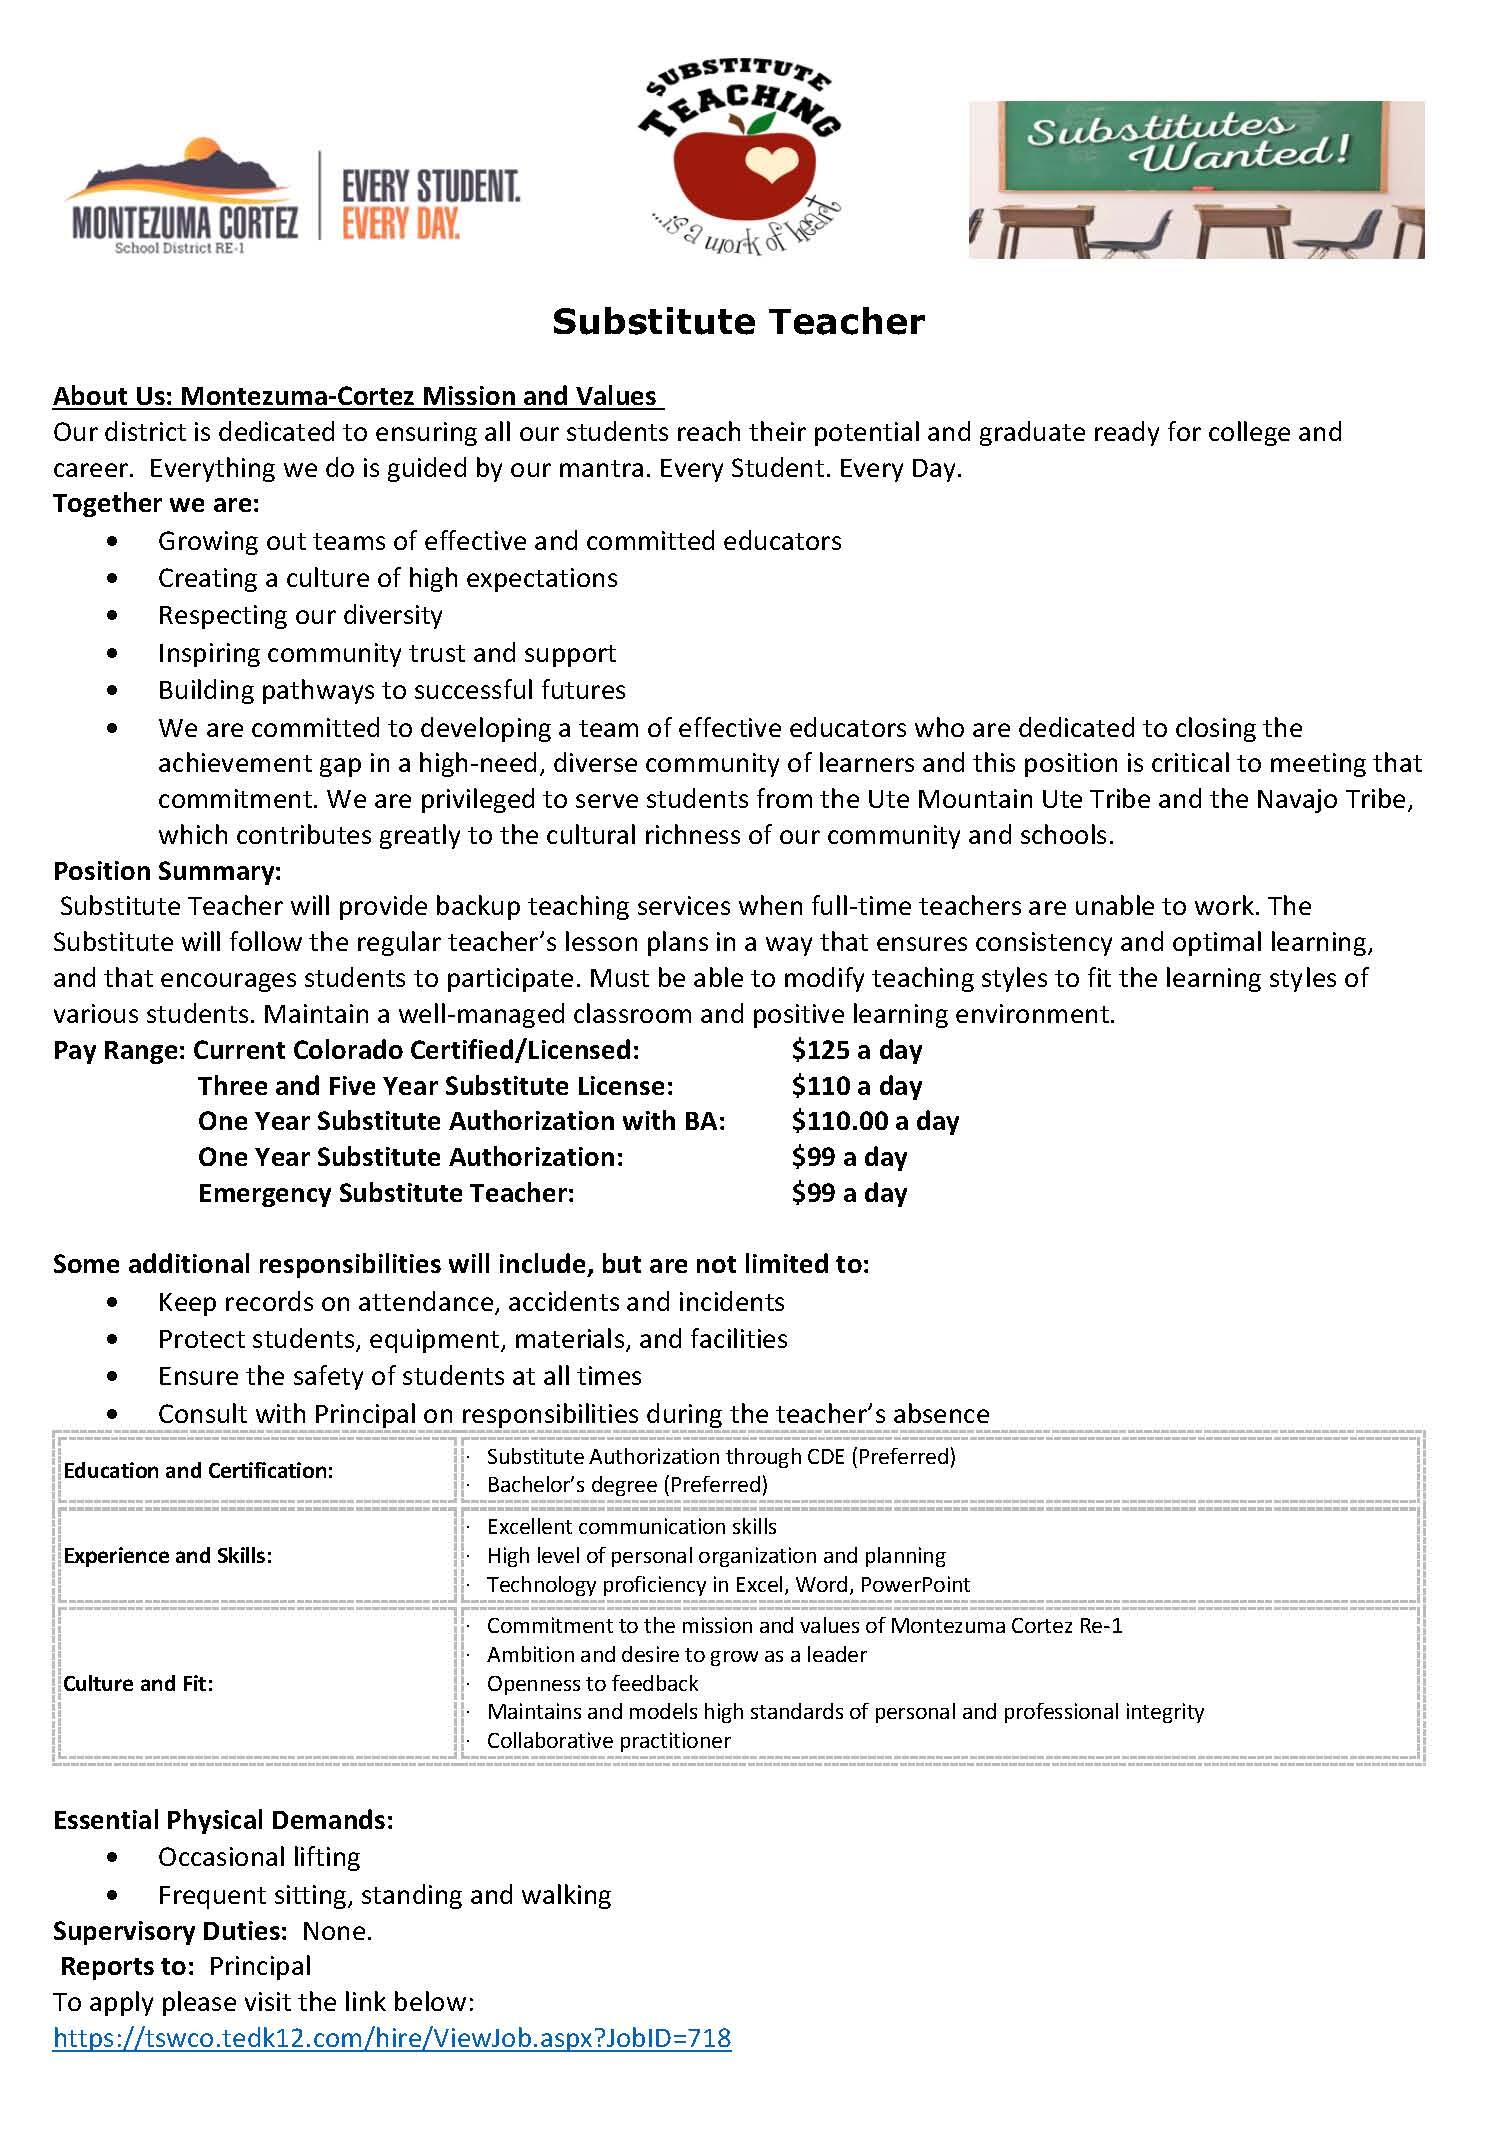 Details on the qualifications for applying to be a substitute teacher